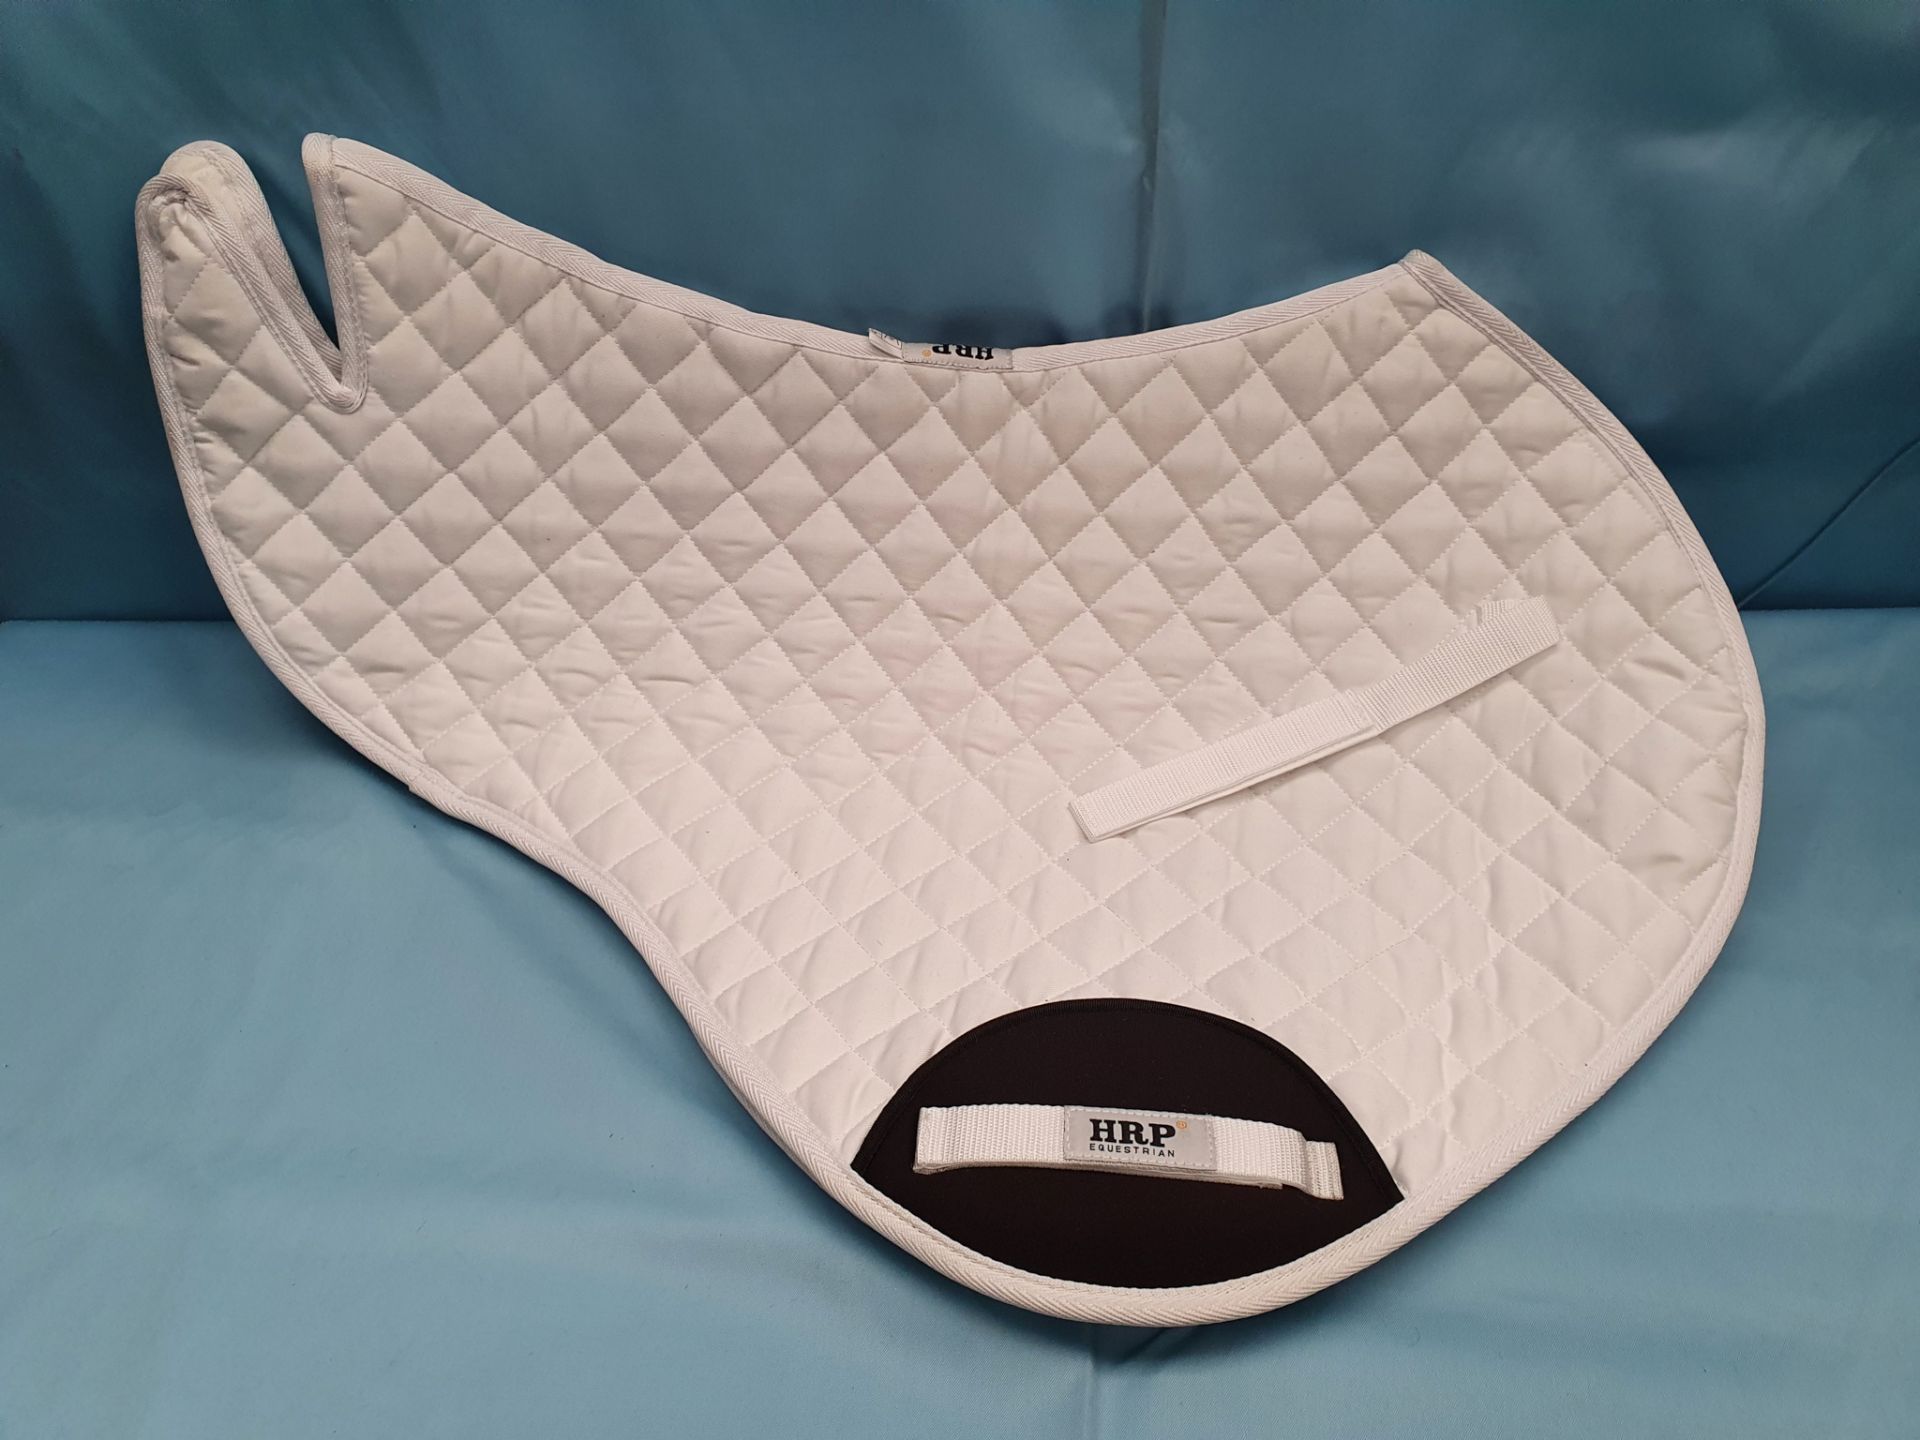 HRP Dressage Saddle Square with Wings